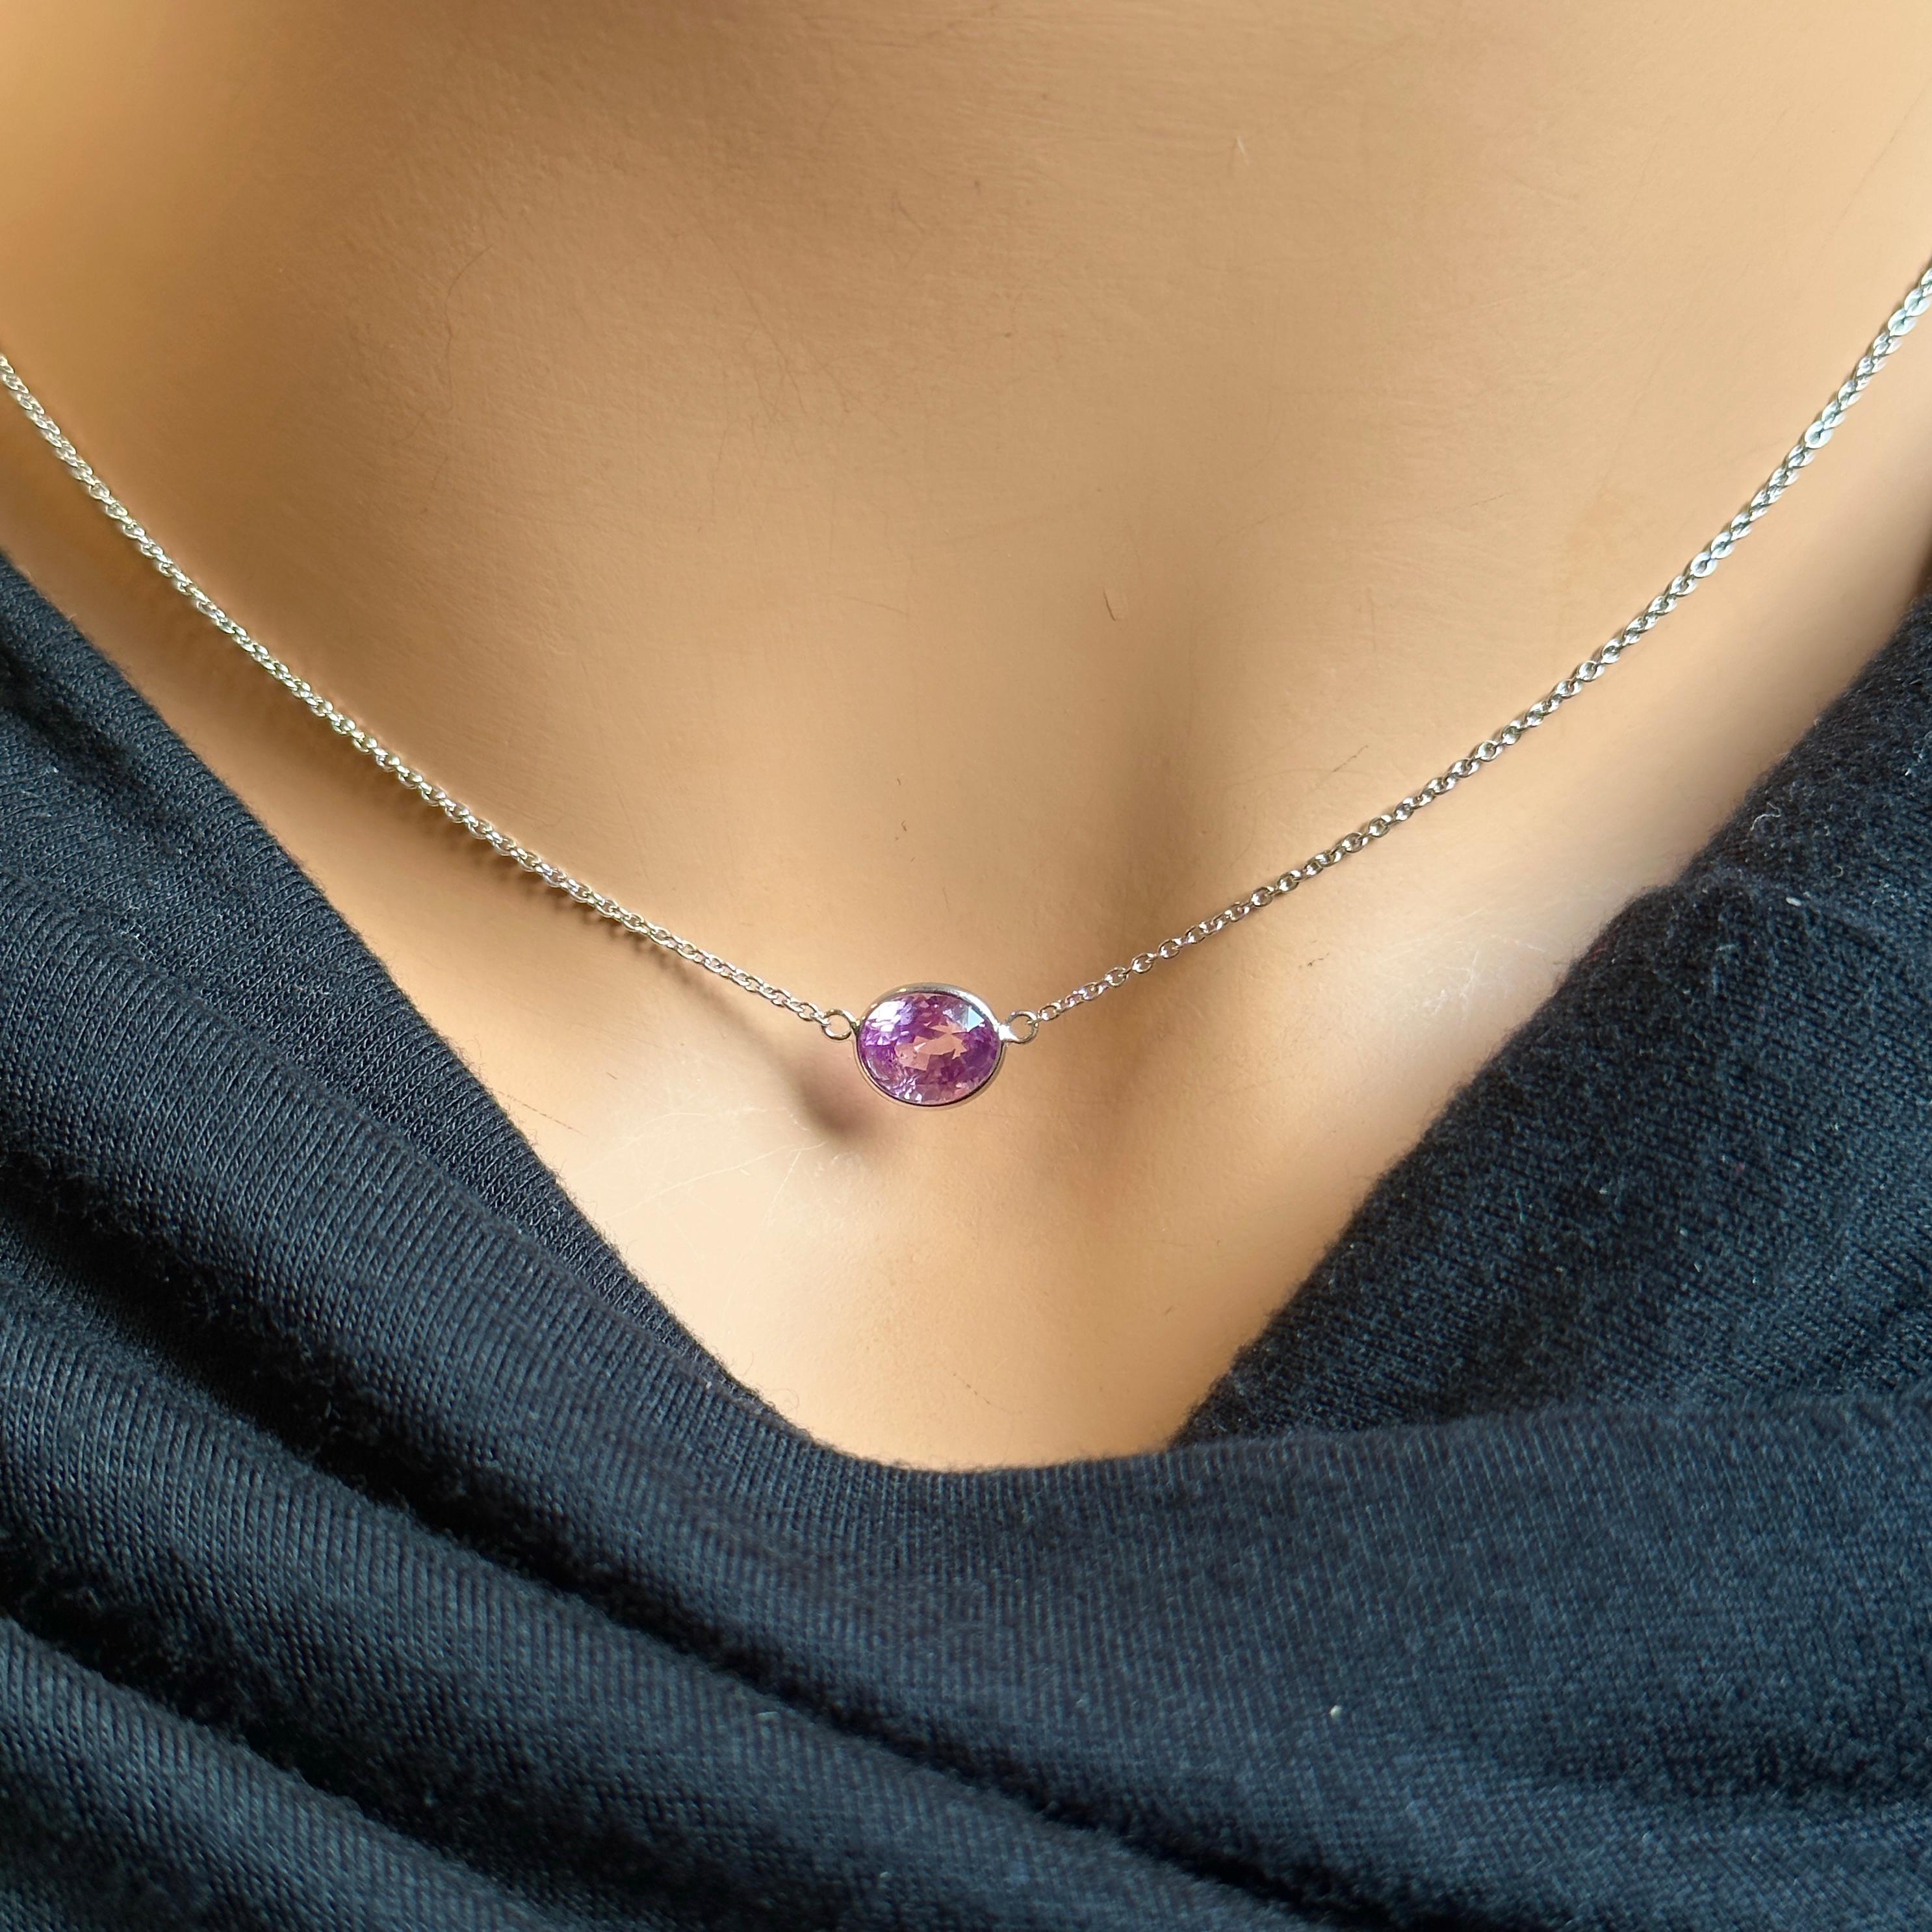 A fashion necklace crafted in 14k white gold with a main stone of a certified oval-cut purple sapphire weighing 2.20 carats would be a stunning and luxurious choice. Purple sapphires are known for their regal and captivating color, and the oval cut